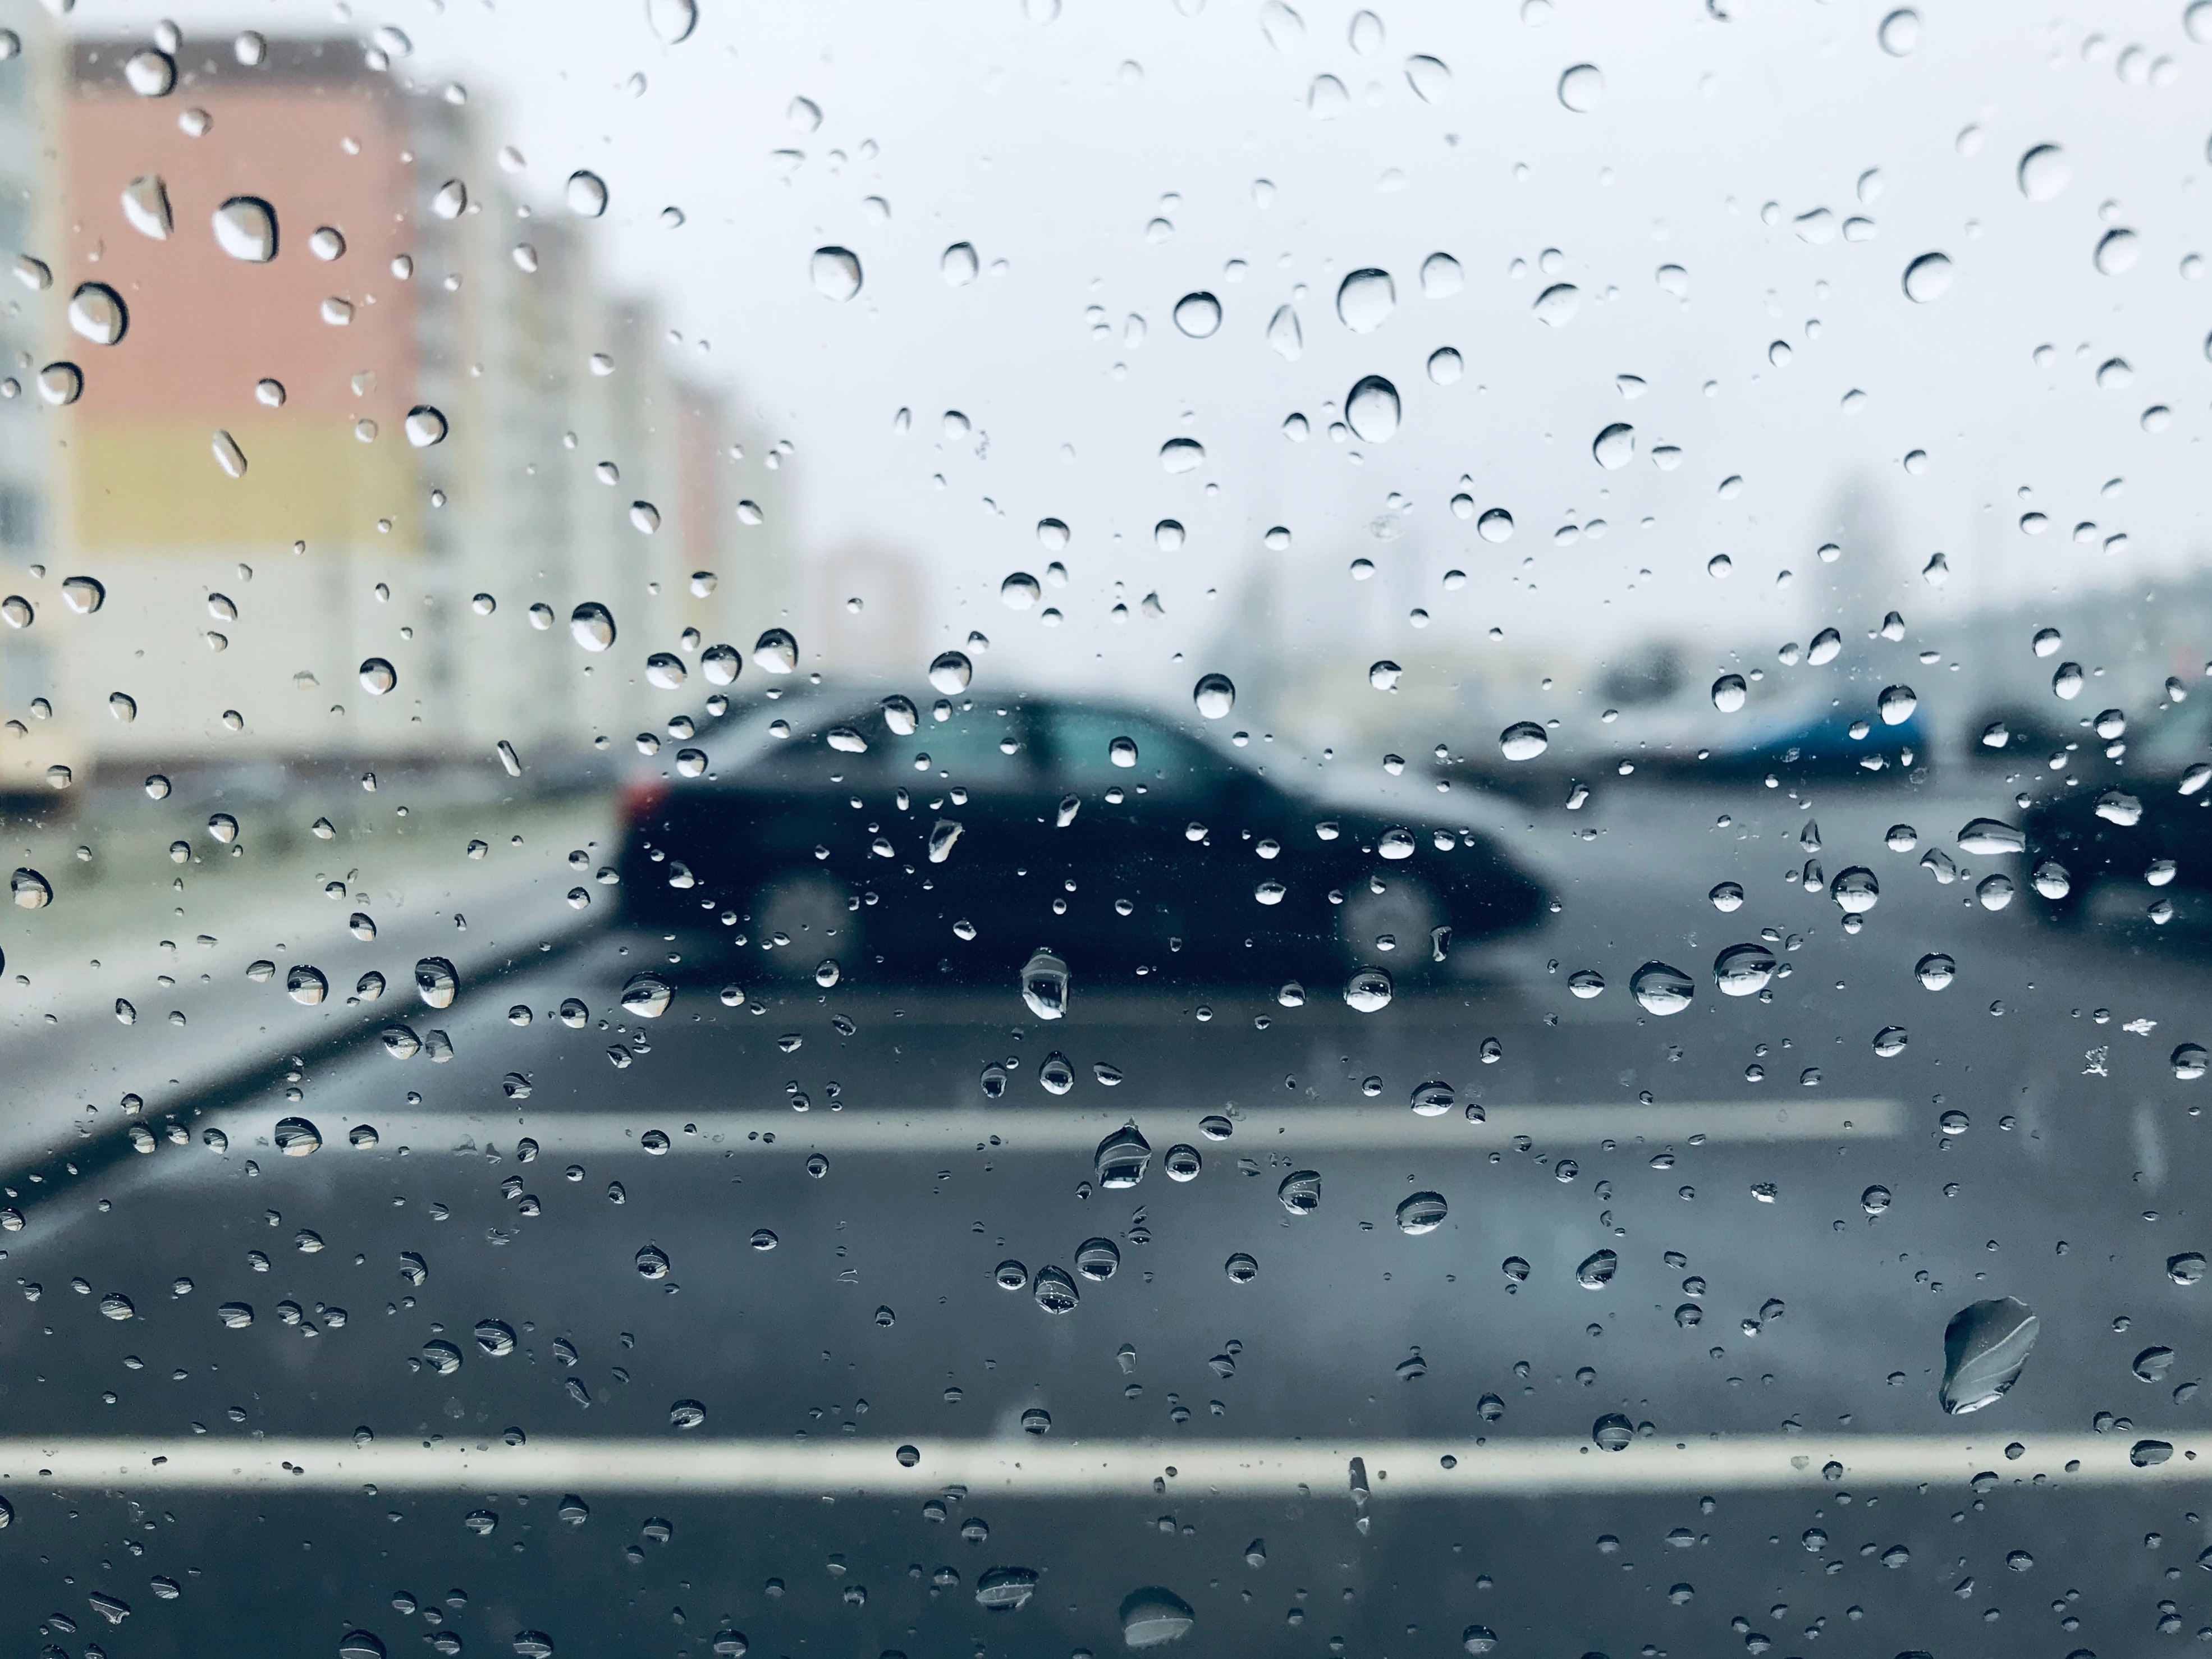 view of unfocused parked car through water droplets